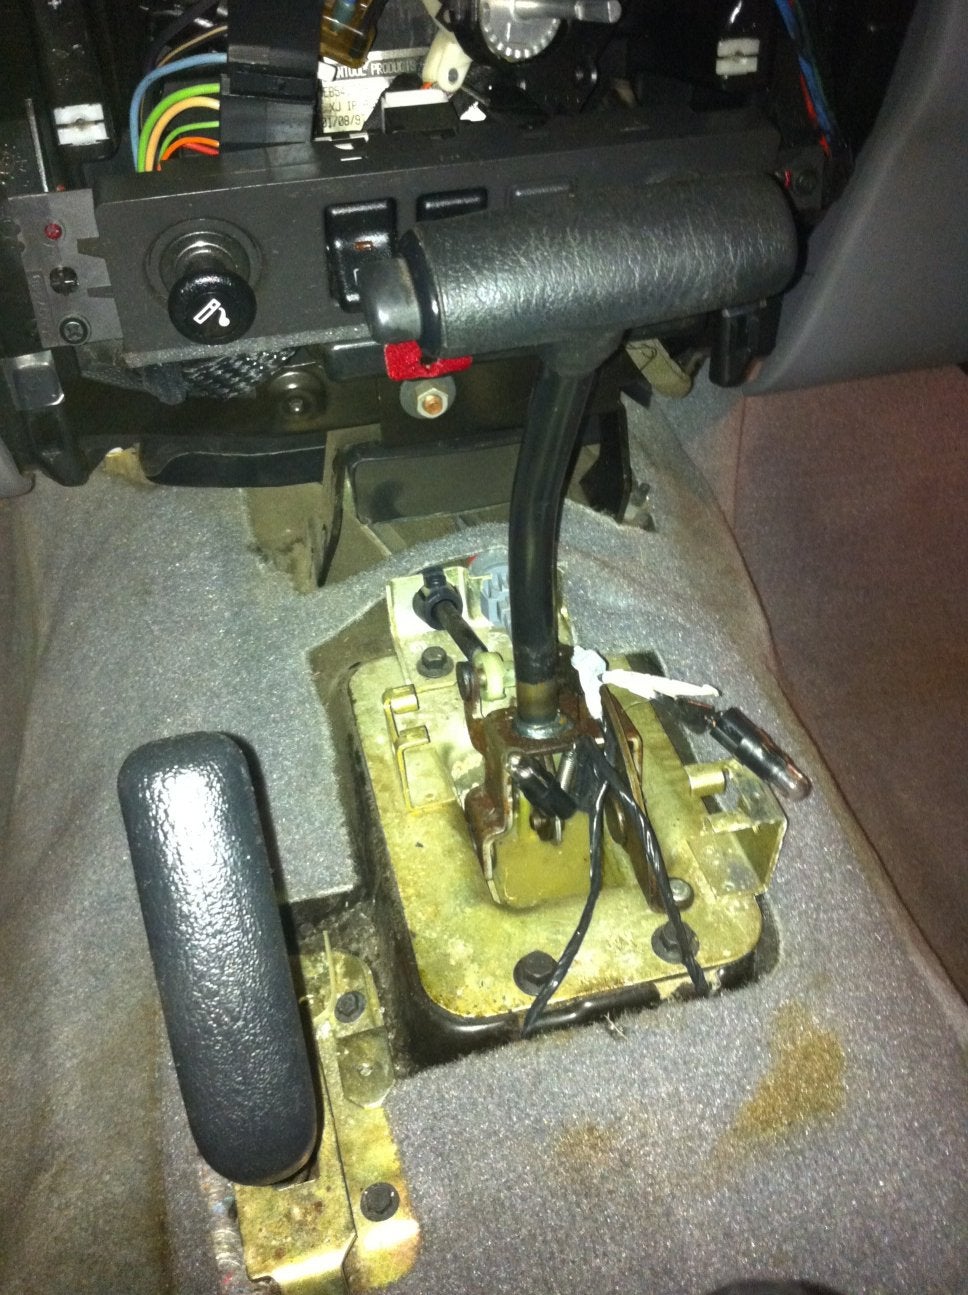 97-01 Automatic Shifter Knob Removal & Replacement | Jeep Enthusiast Forums